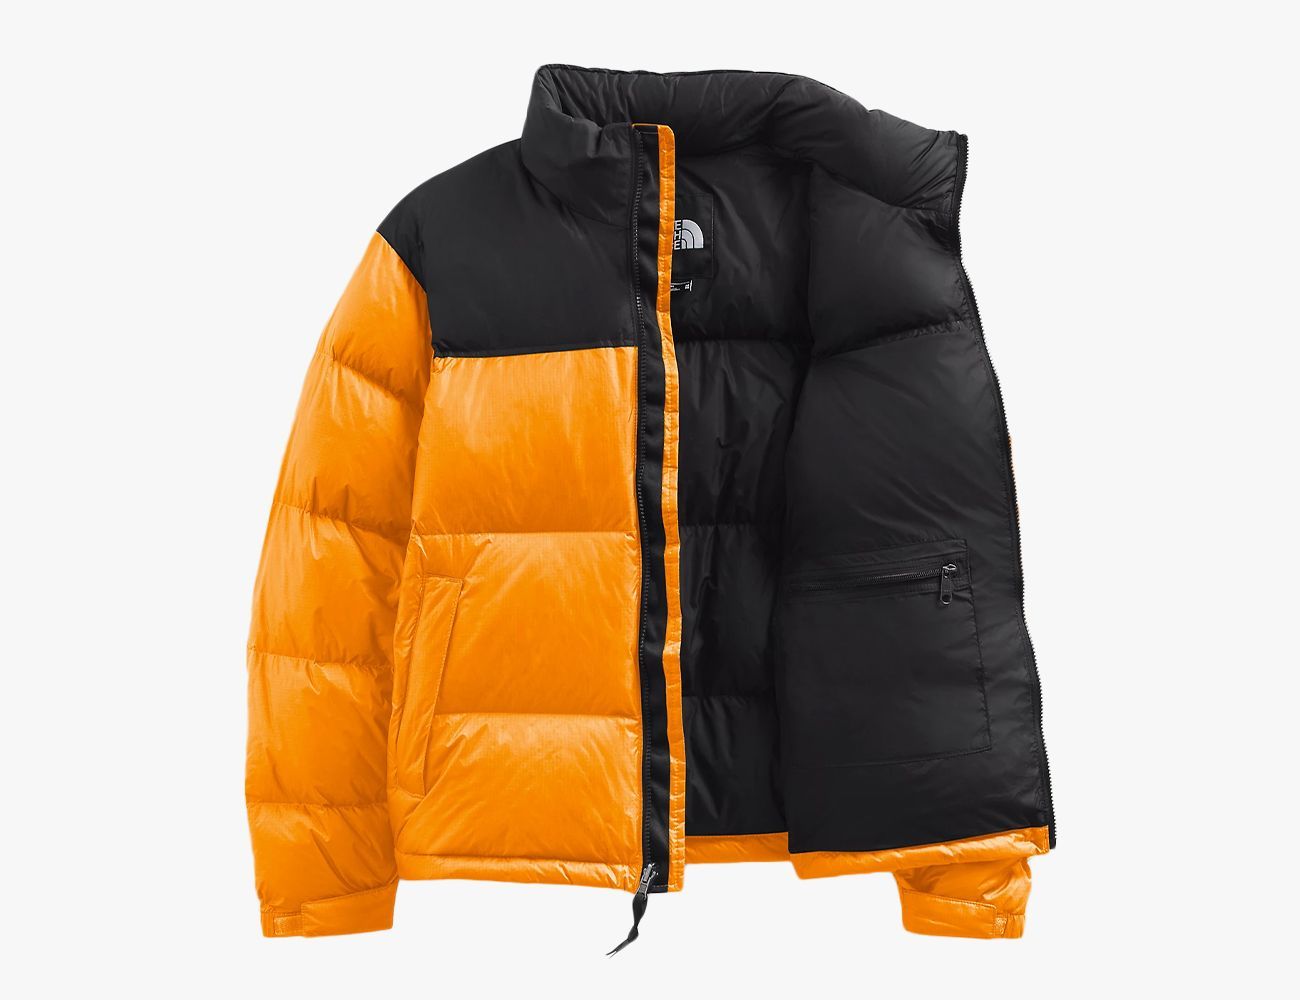 The North Face's 1996 Nuptse Jacket: Popular, But Is It Worth It?